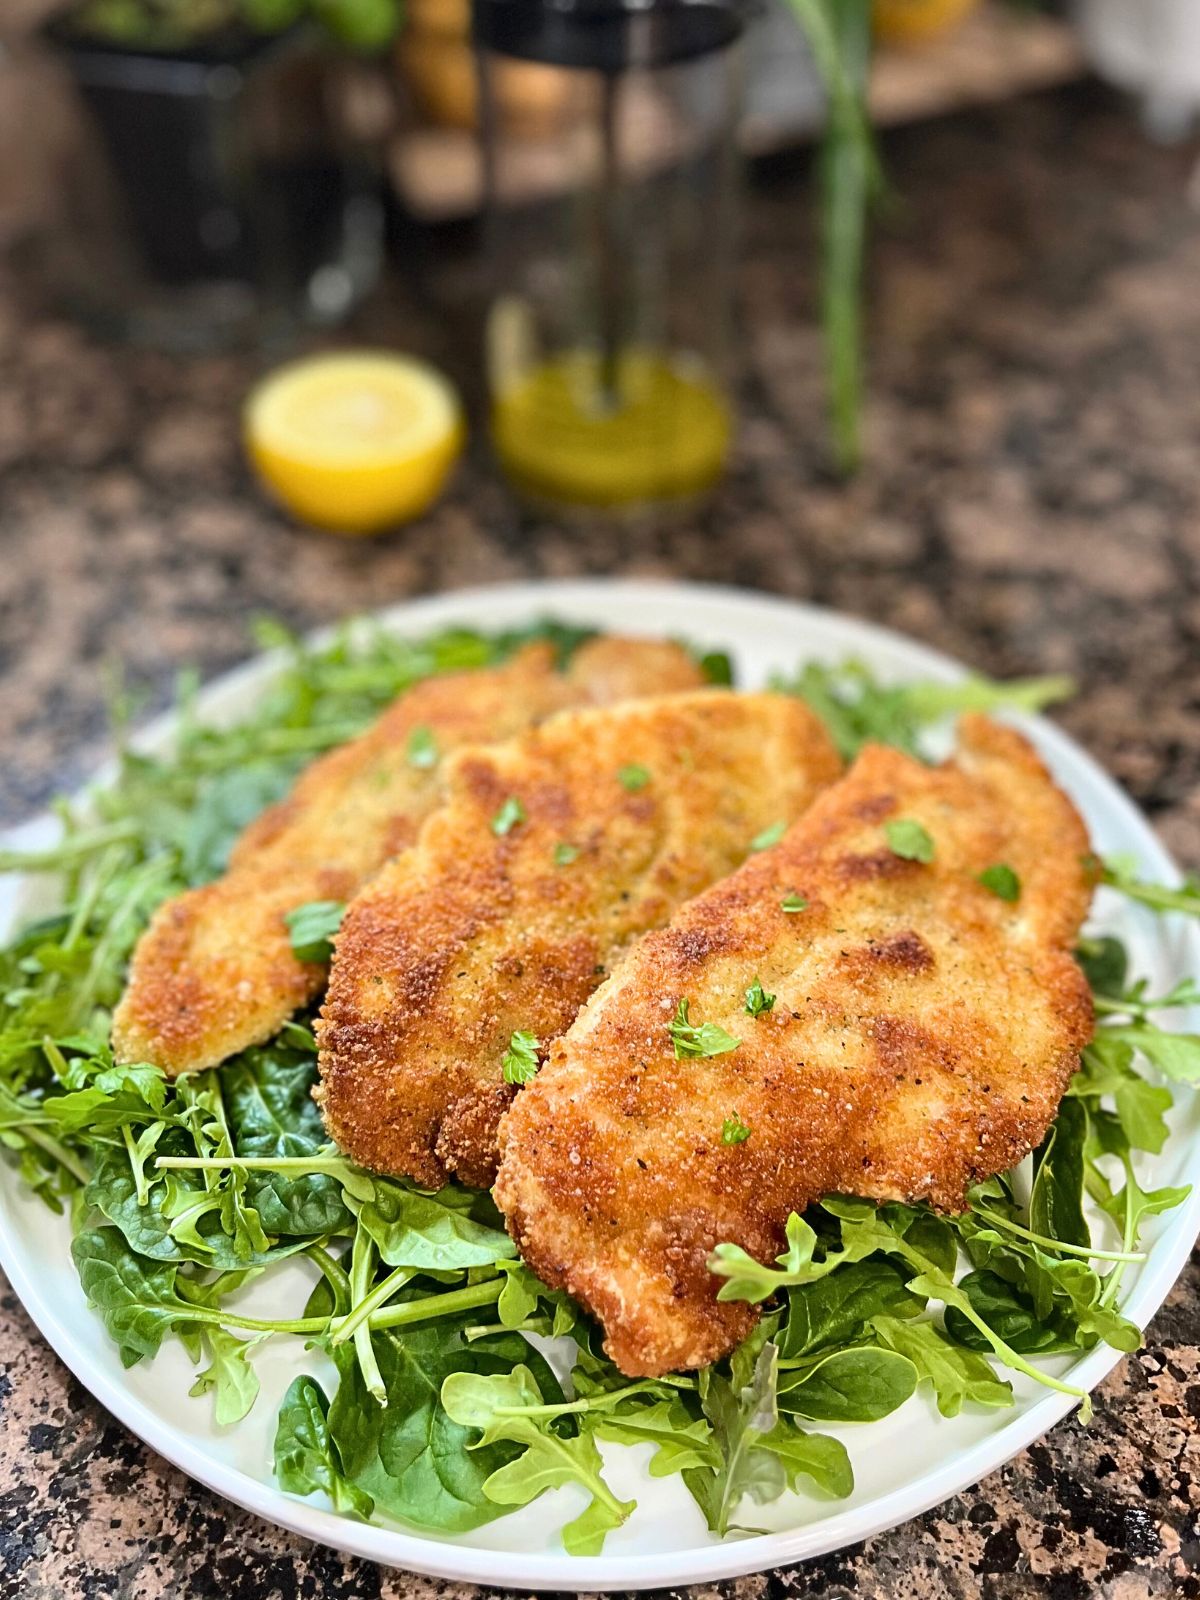 3 Crispy Chicken cutlets are on a bed of arugula greens which is on a white serving plate. Blurred in the back is a half lemon and a jar of dressing.